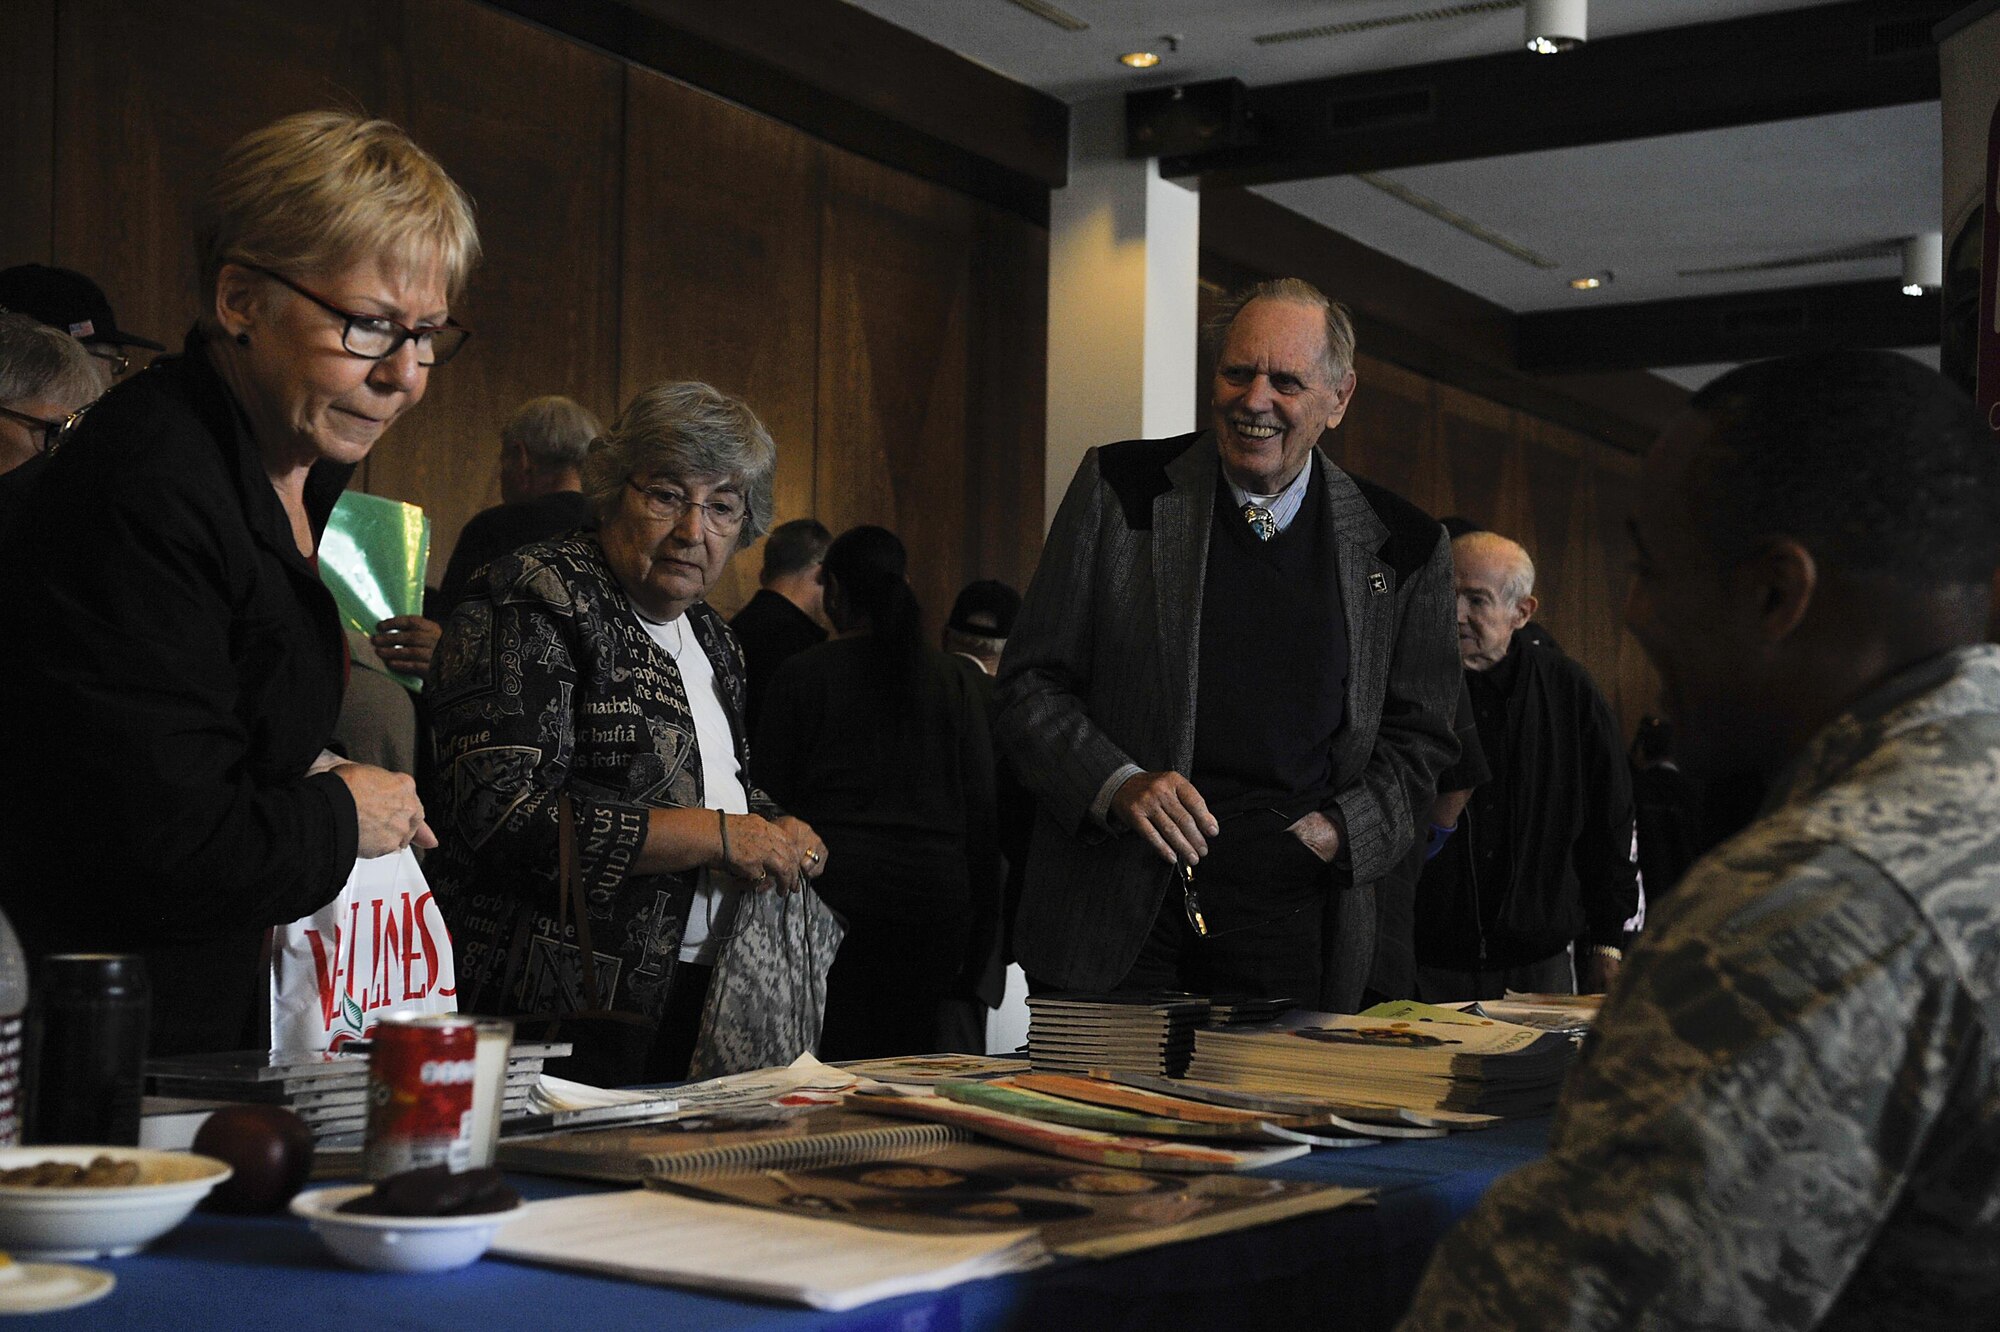 Retirees and their spouses visit informational booths during a Retiree Appreciation Week event at Ramstein Air Base, Germany, Oct. 4, 2016. The 86th Airlift Wing Retiree Activities Office works year-round to provide assistance to retirees and their spouses. Retiree Appreciation Week, an annual event, is just one way for them to provide an easy way for retirees to take care of multiple errands in one location. (U.S. Air Force photo by Senior Airman Larissa Greatwood)